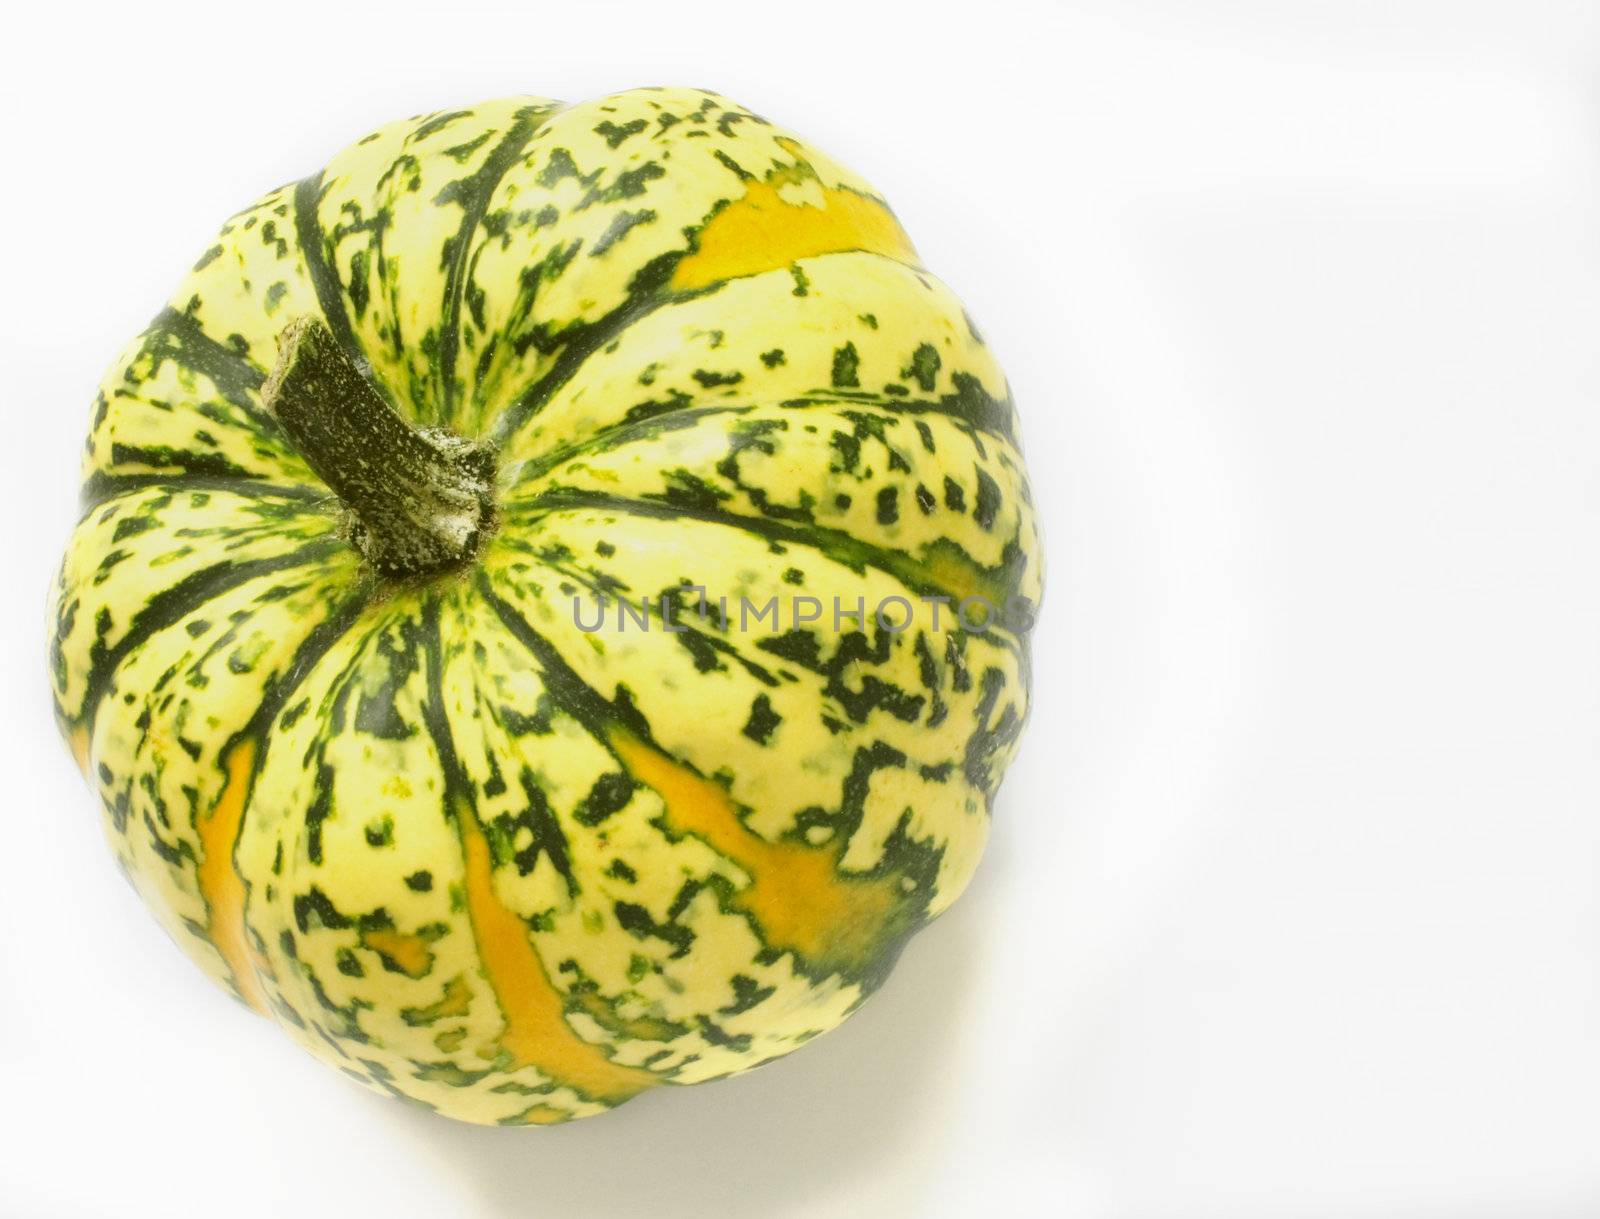 green and yellow ornamental squash by leafy